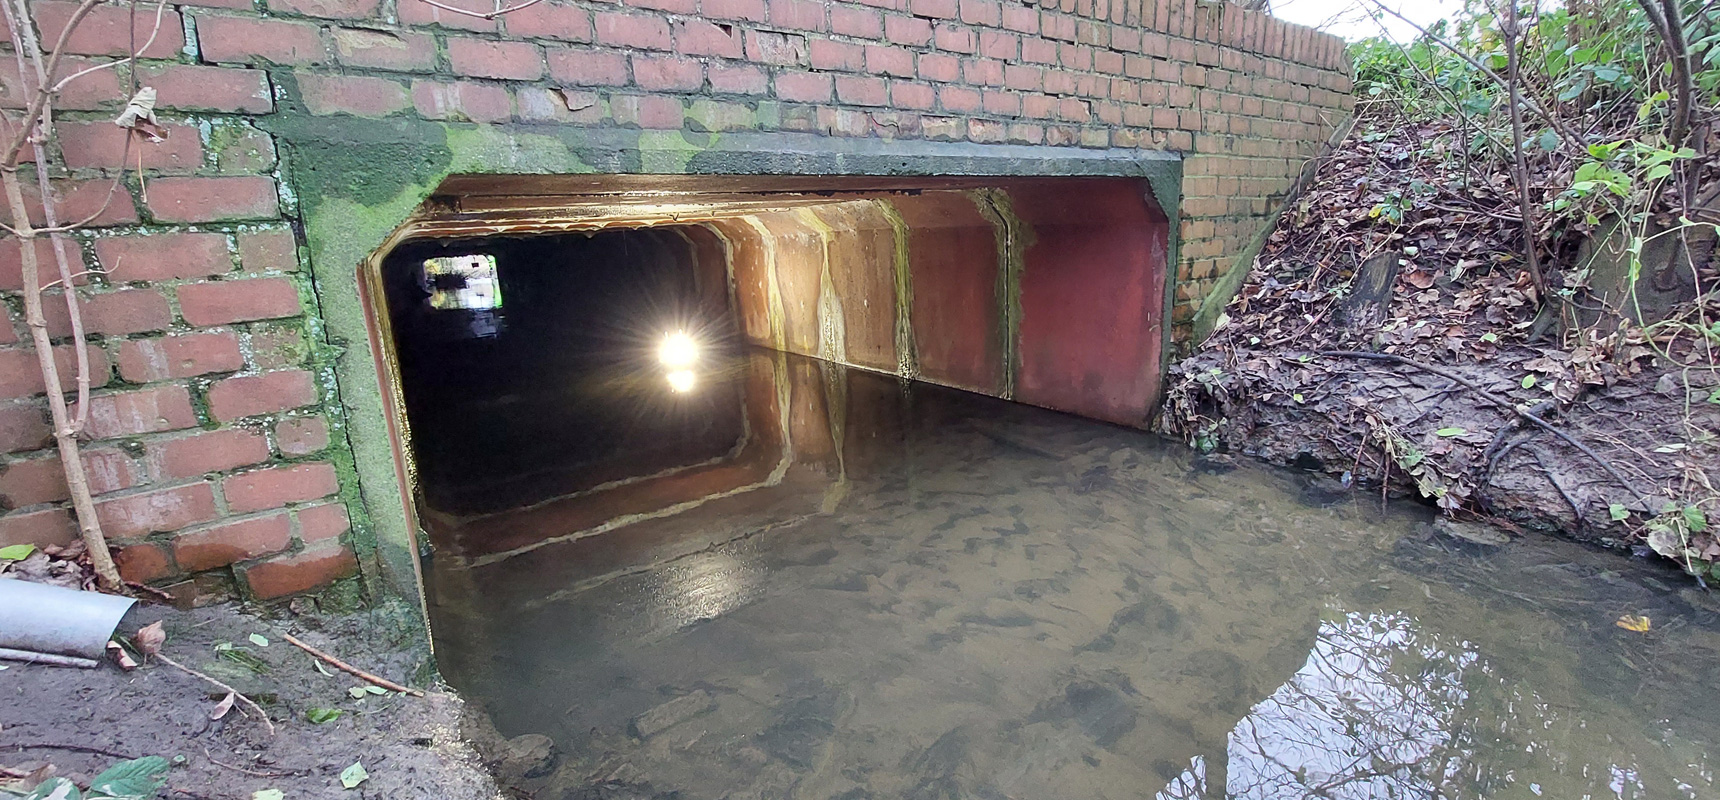 Measurement and inspection of culverts